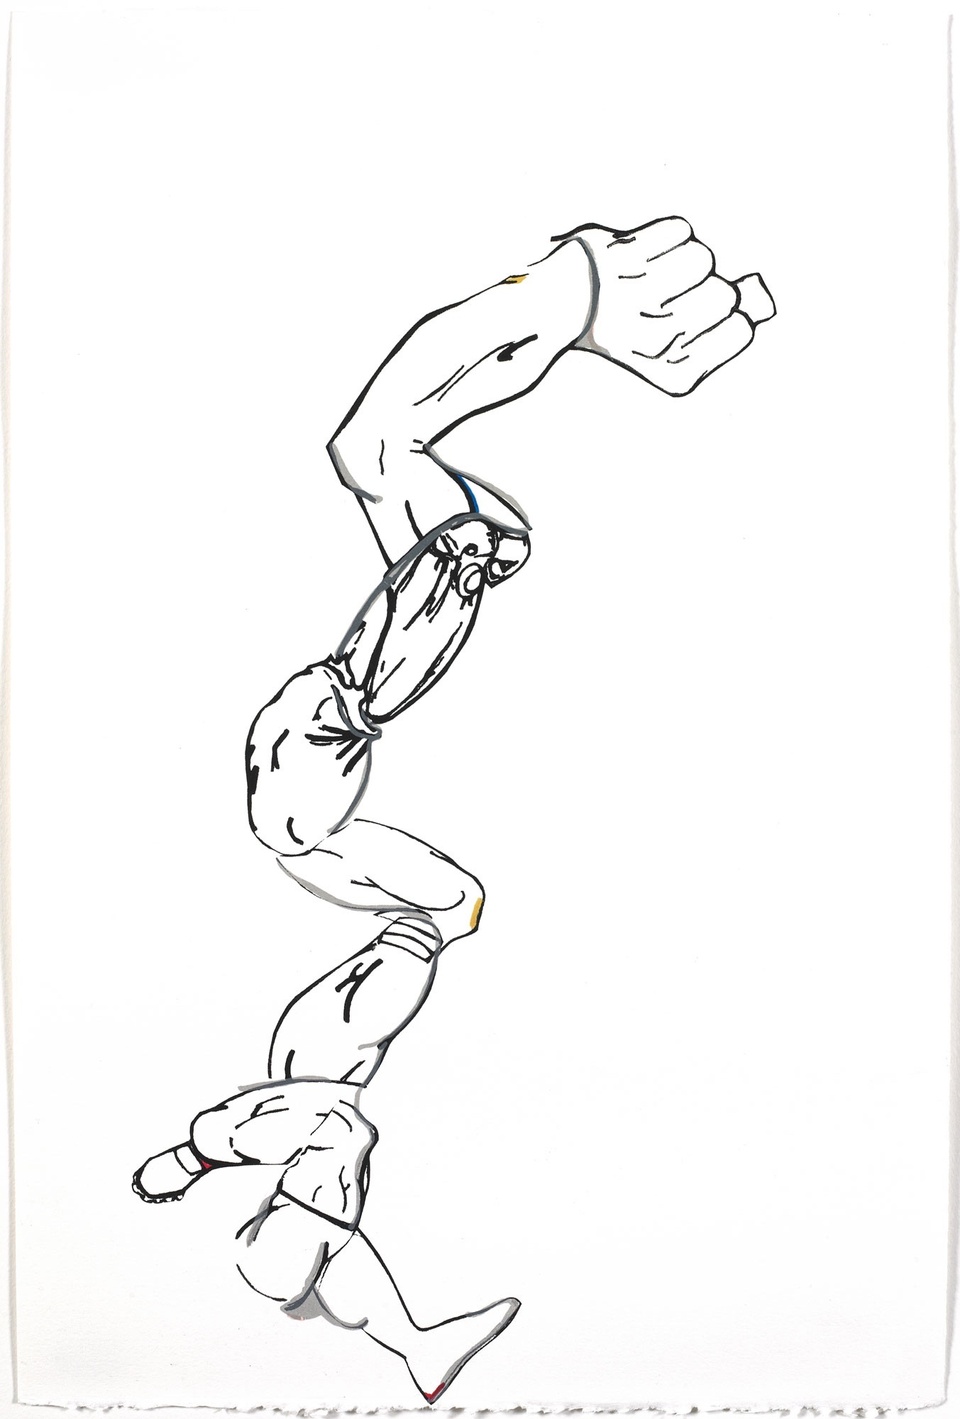 image of abstracted foot and hand drawn in black against a white background 